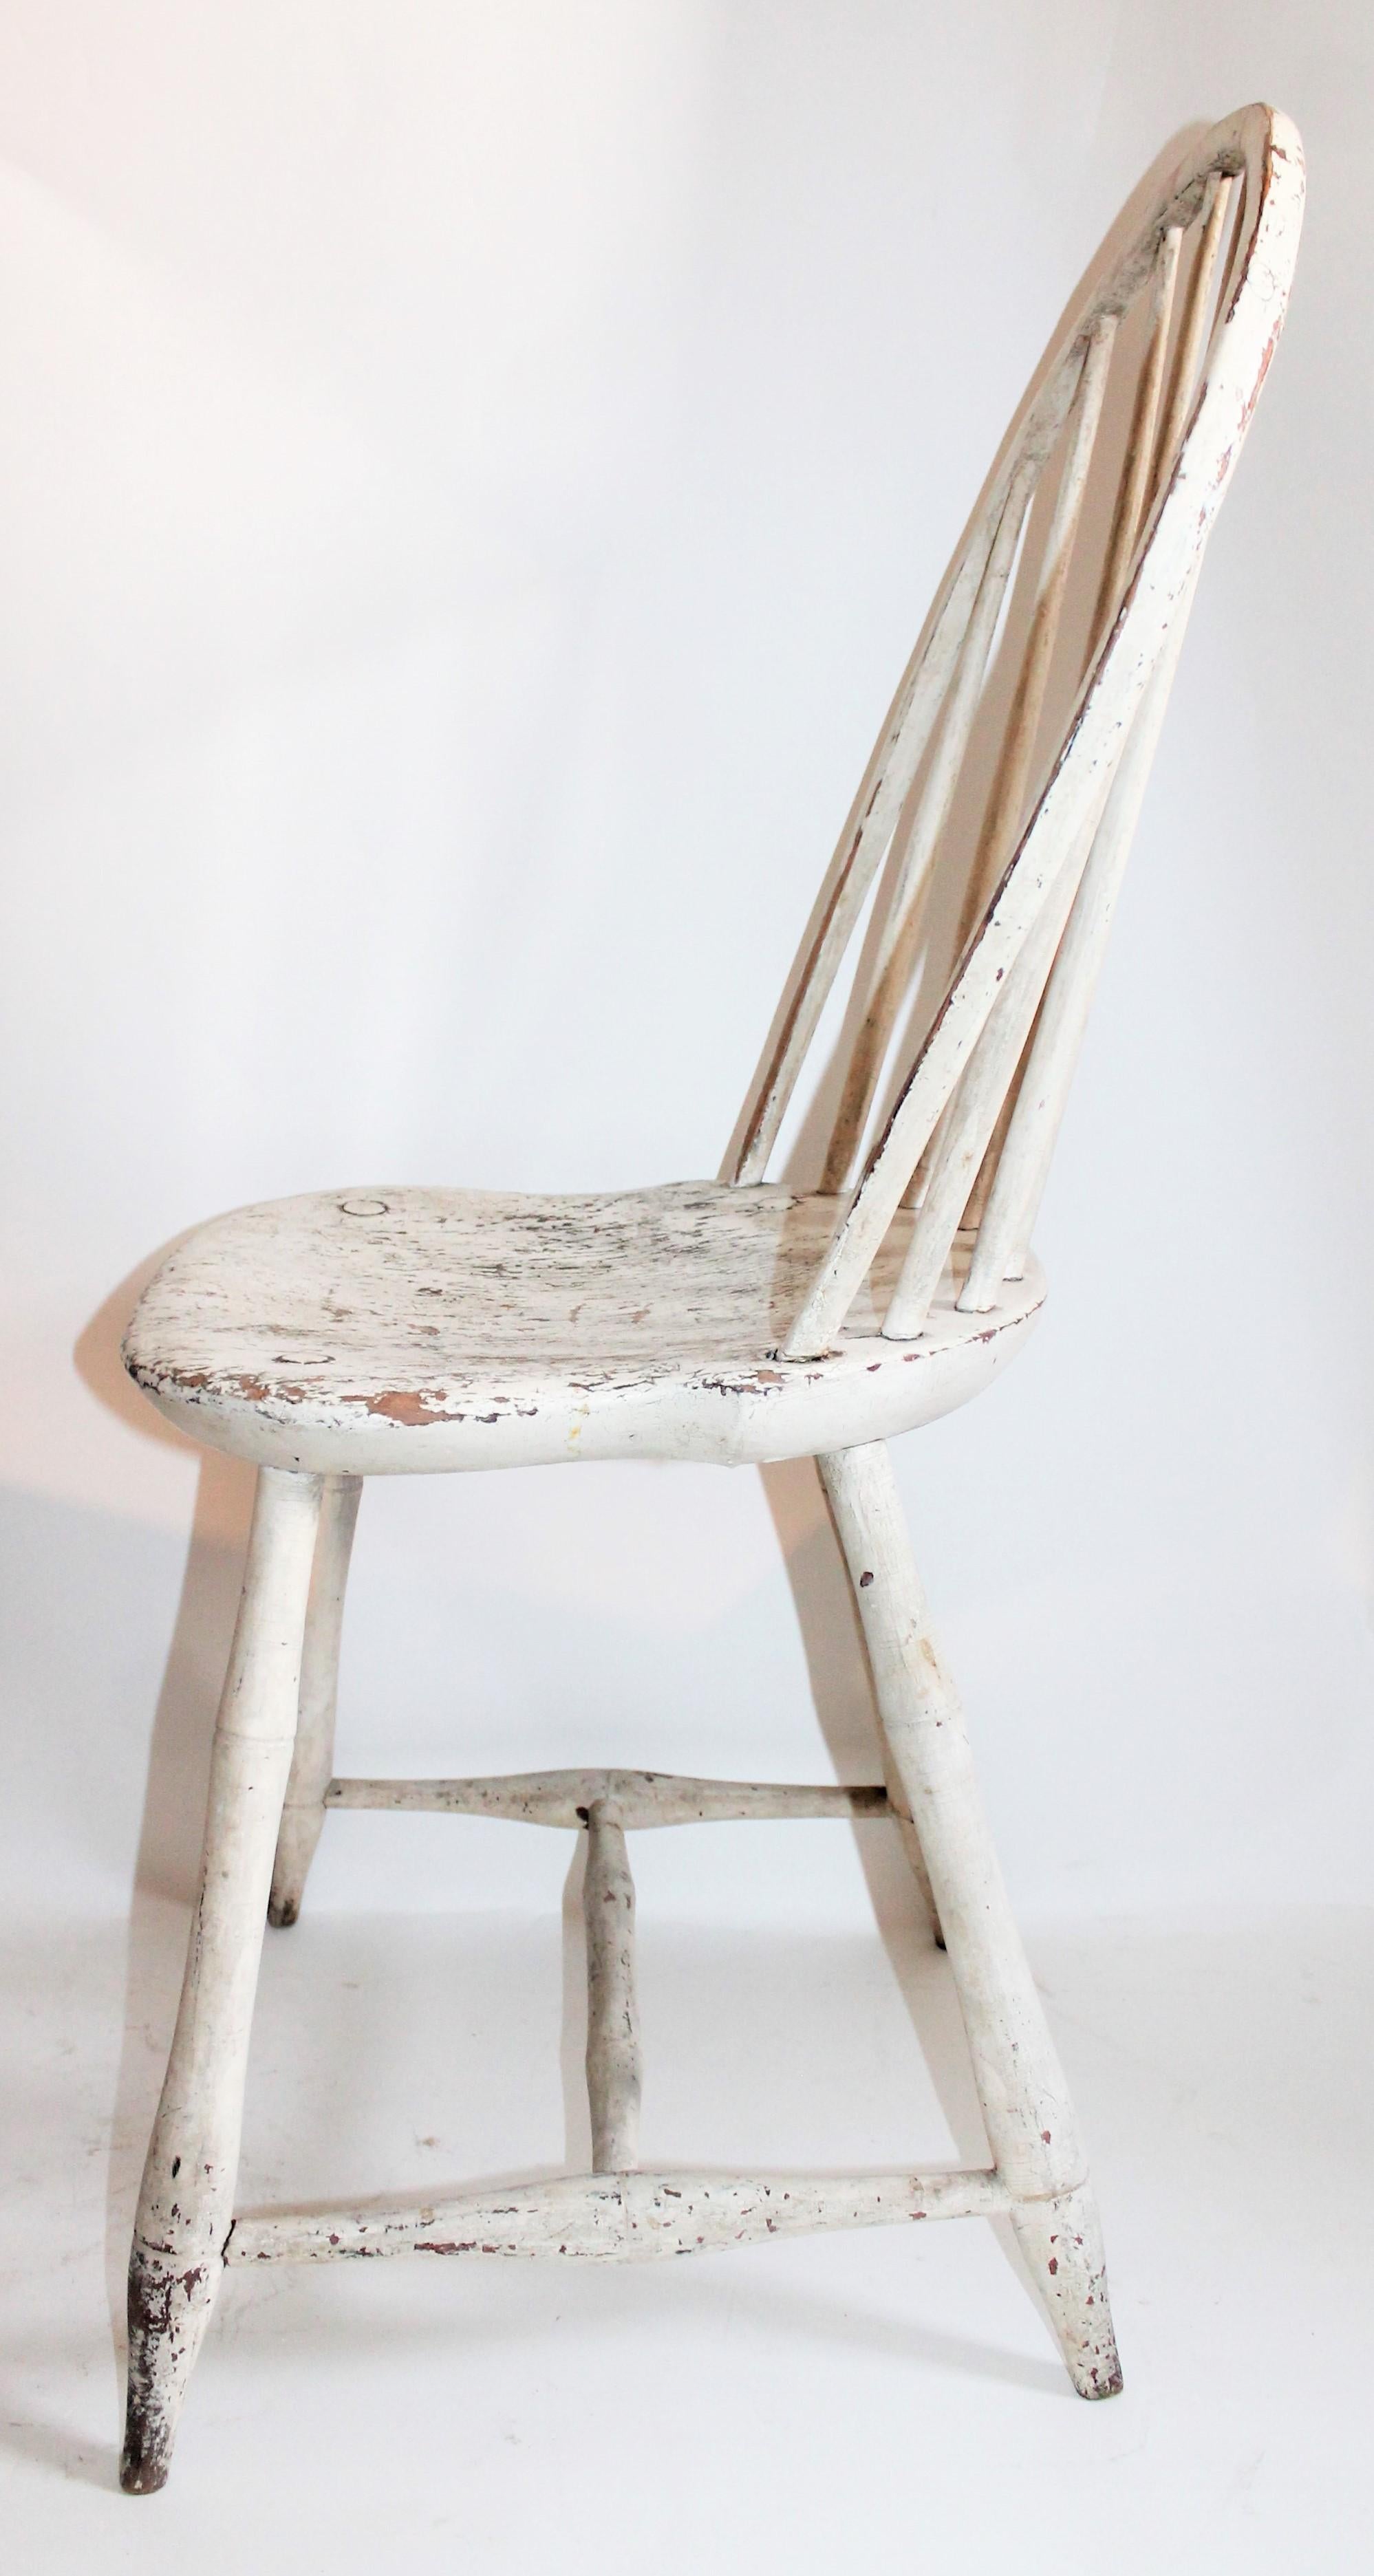 how to recognize original antique windsor chairs